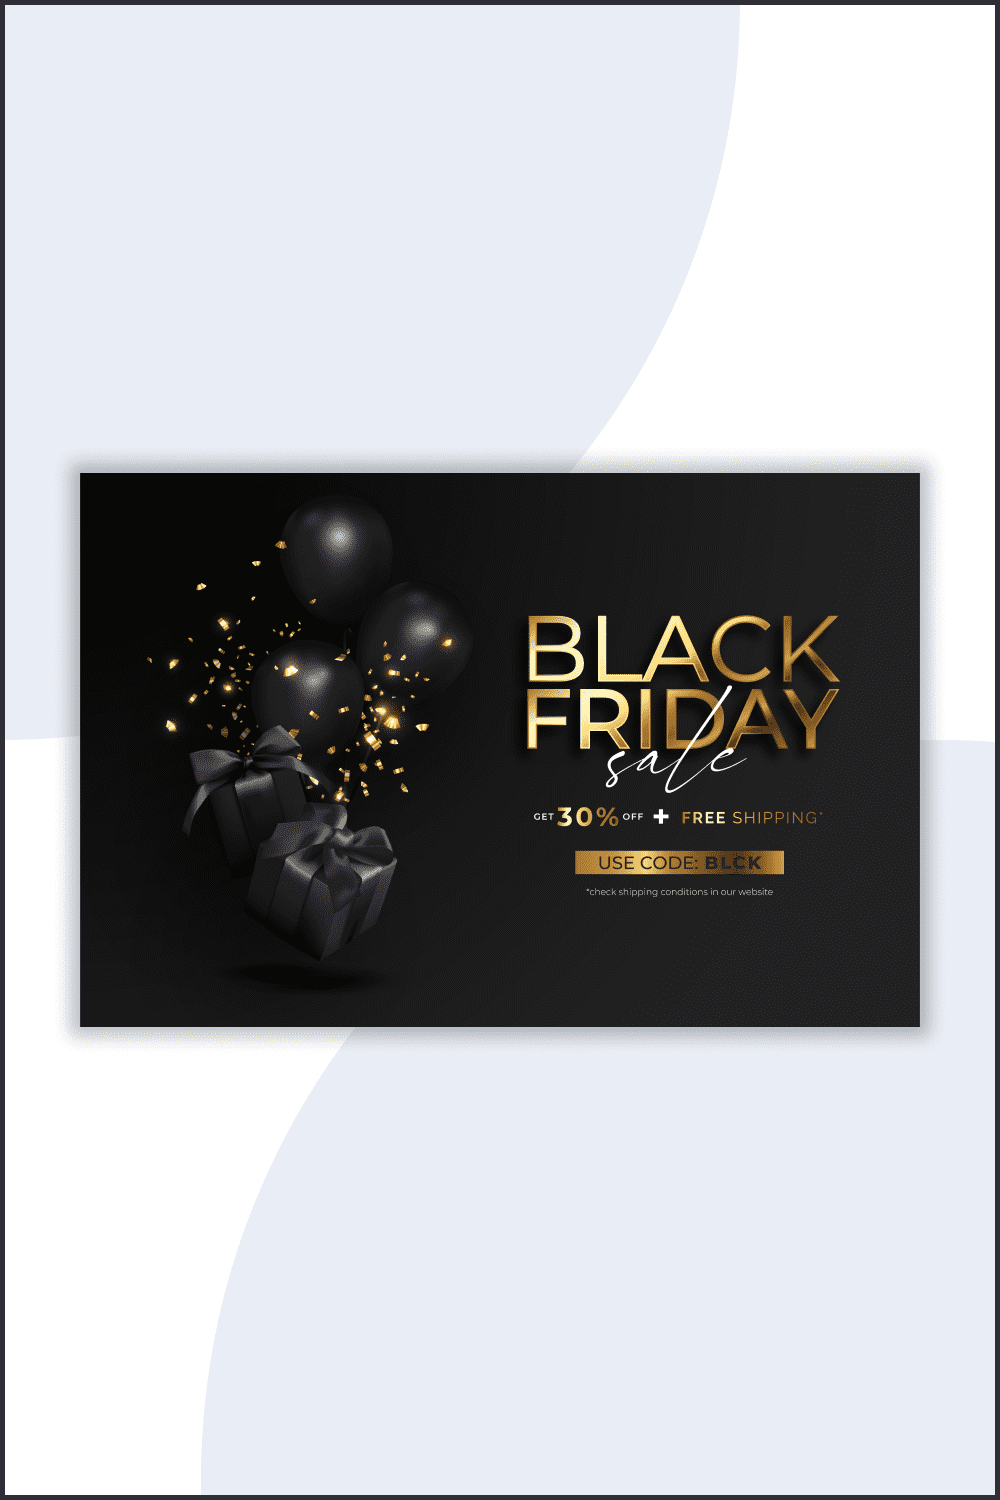 Black gifts with golden glitters and golden text Black Friday on black background.